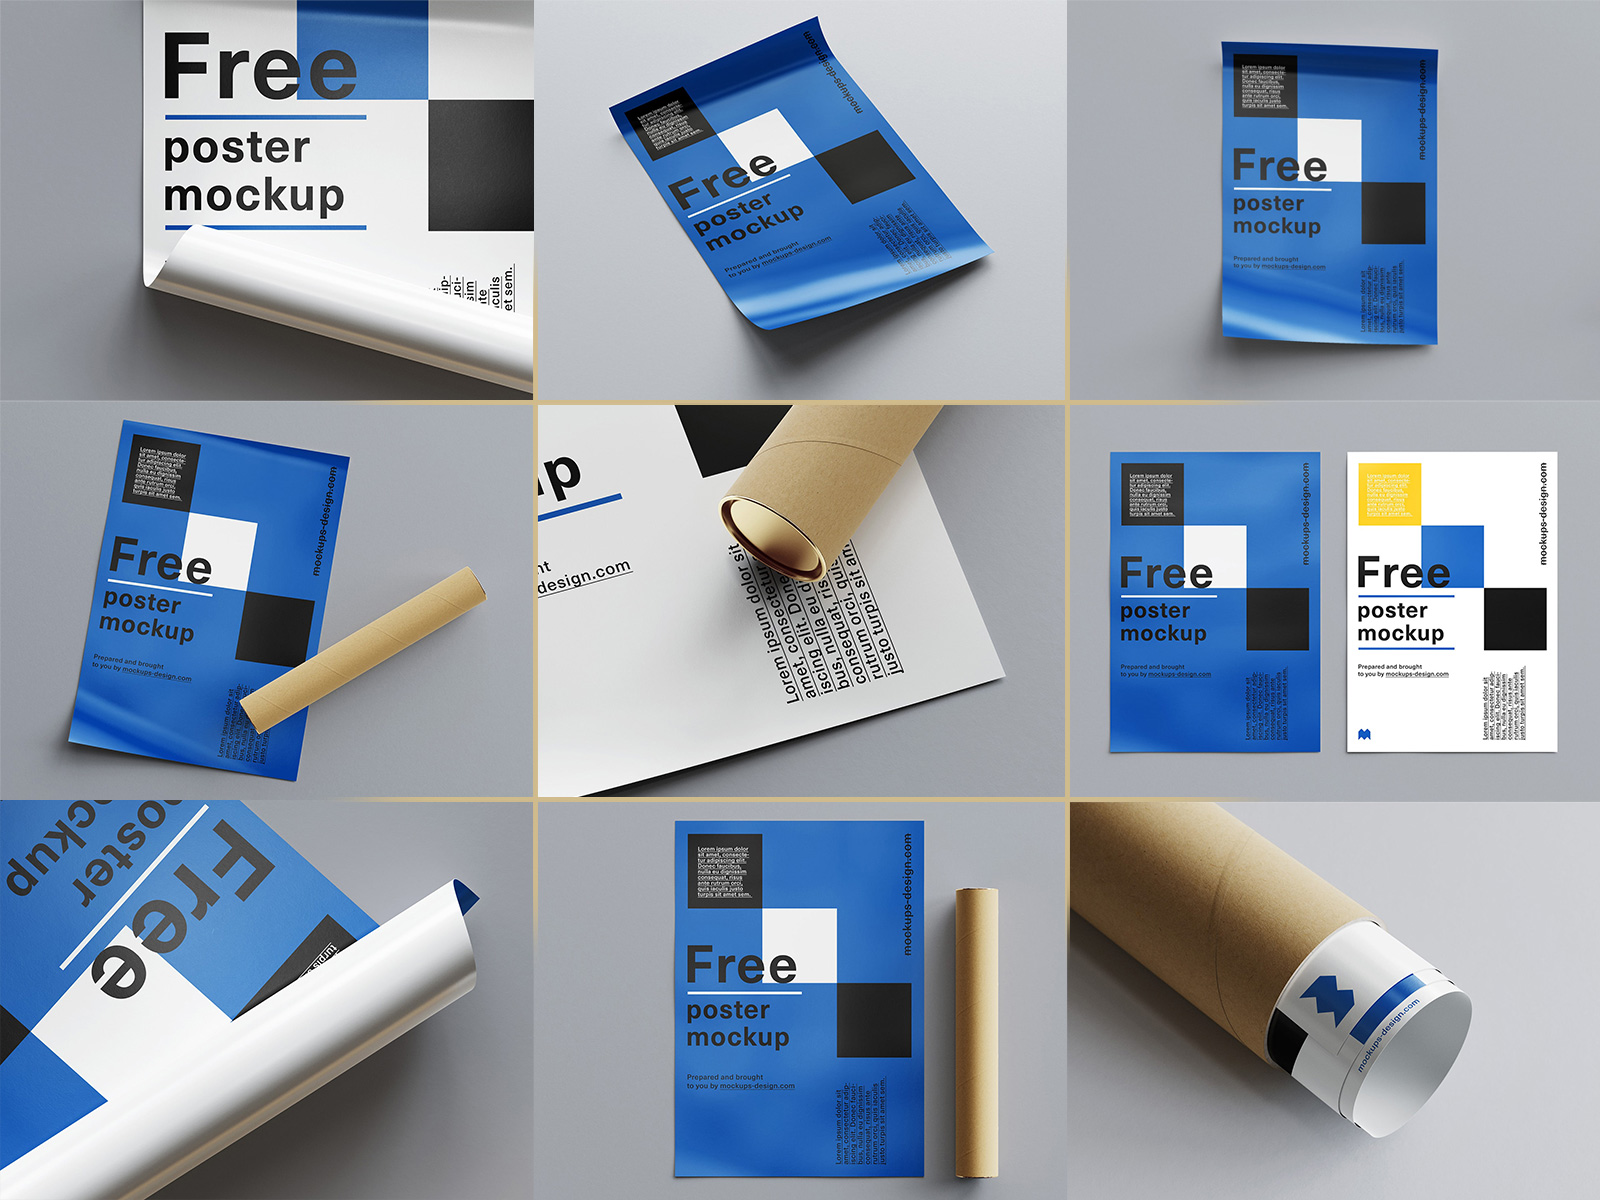 Download 11 Free Rolled And Curled Up Poster Mockup Psd Set Psfiles